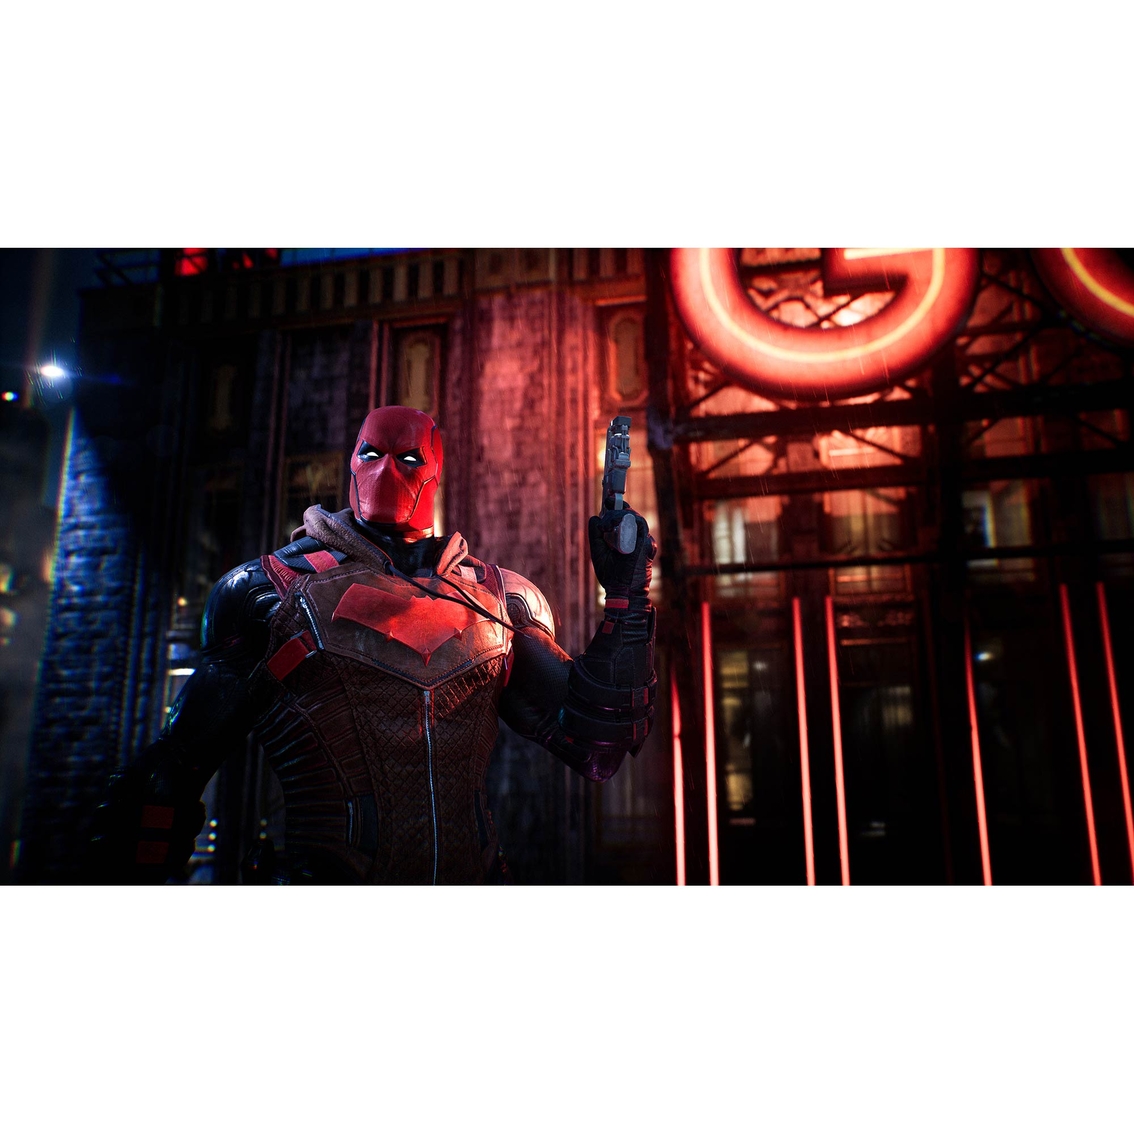 Gotham Knights (PS5) - Image 4 of 8